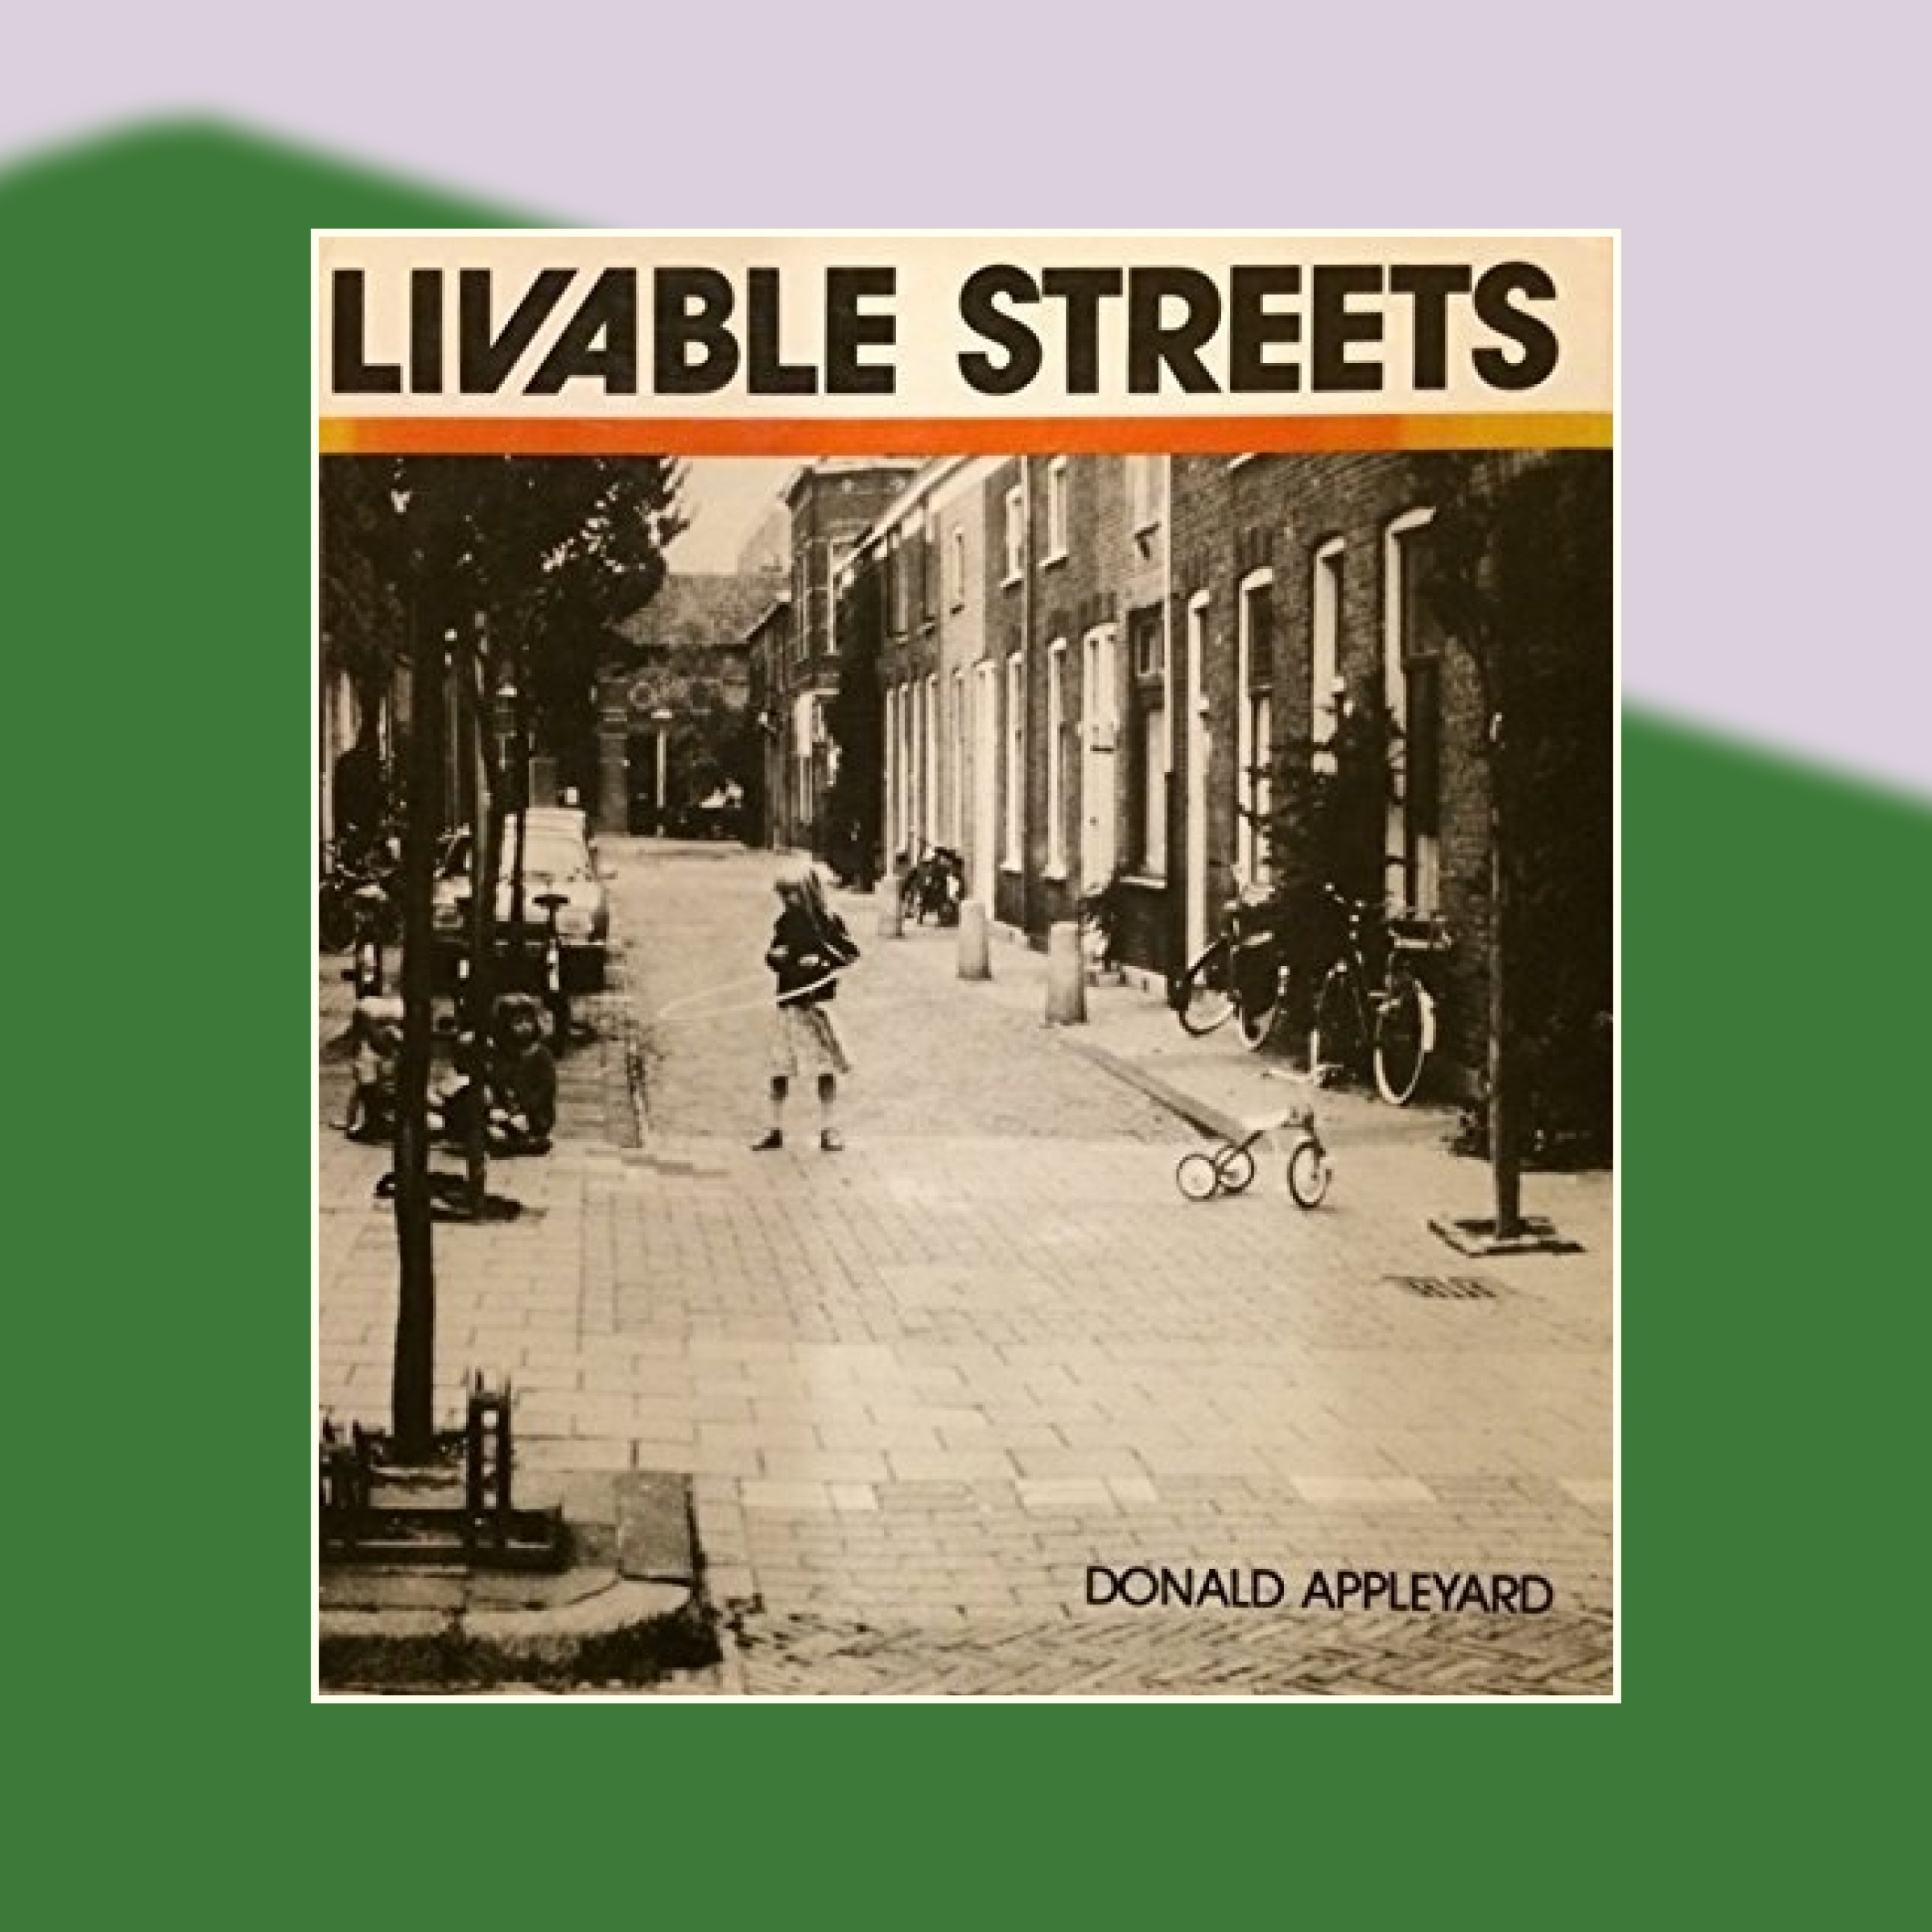 Book cover of Livable Streets against an abstract painted background